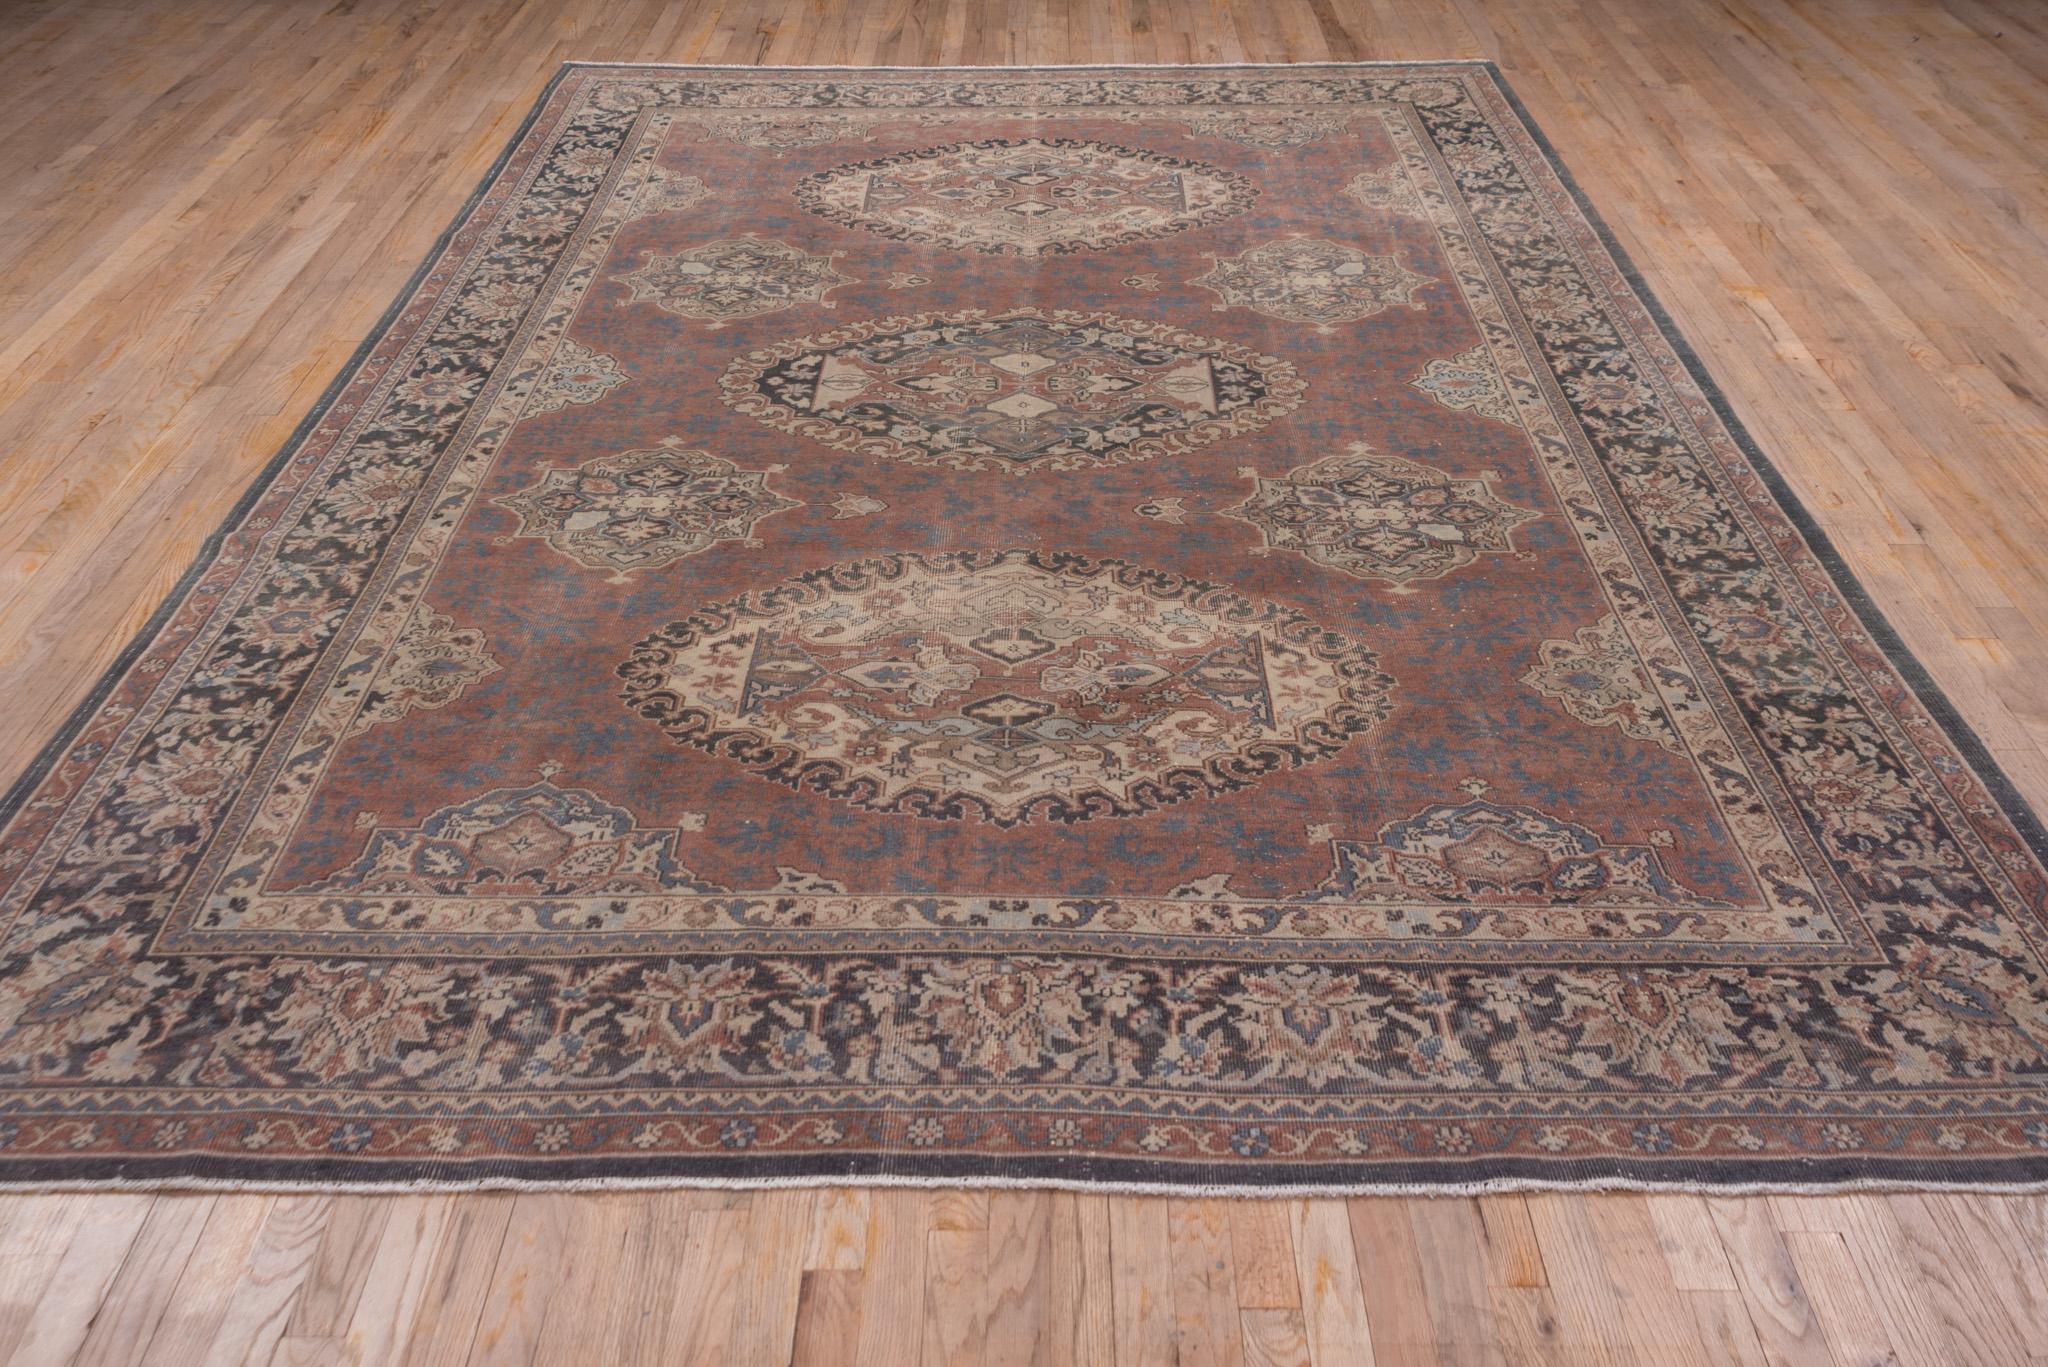 An Oushak Rug circa 1940. Hand knotted, made of 100% wool yarn.